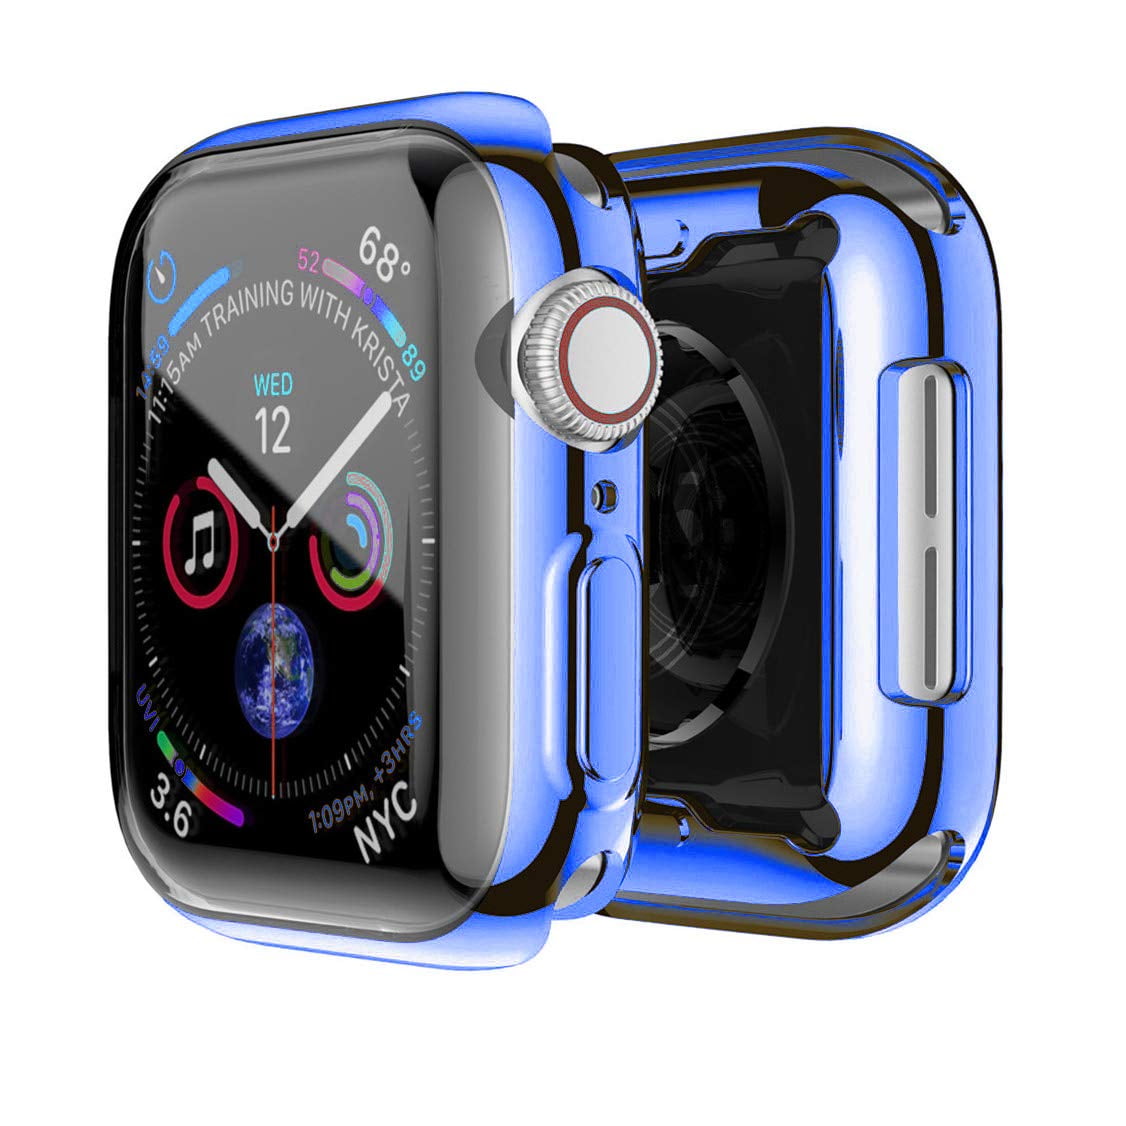 Simyoung iWatch SE Case 44mm Screen Protector for Apple ...
